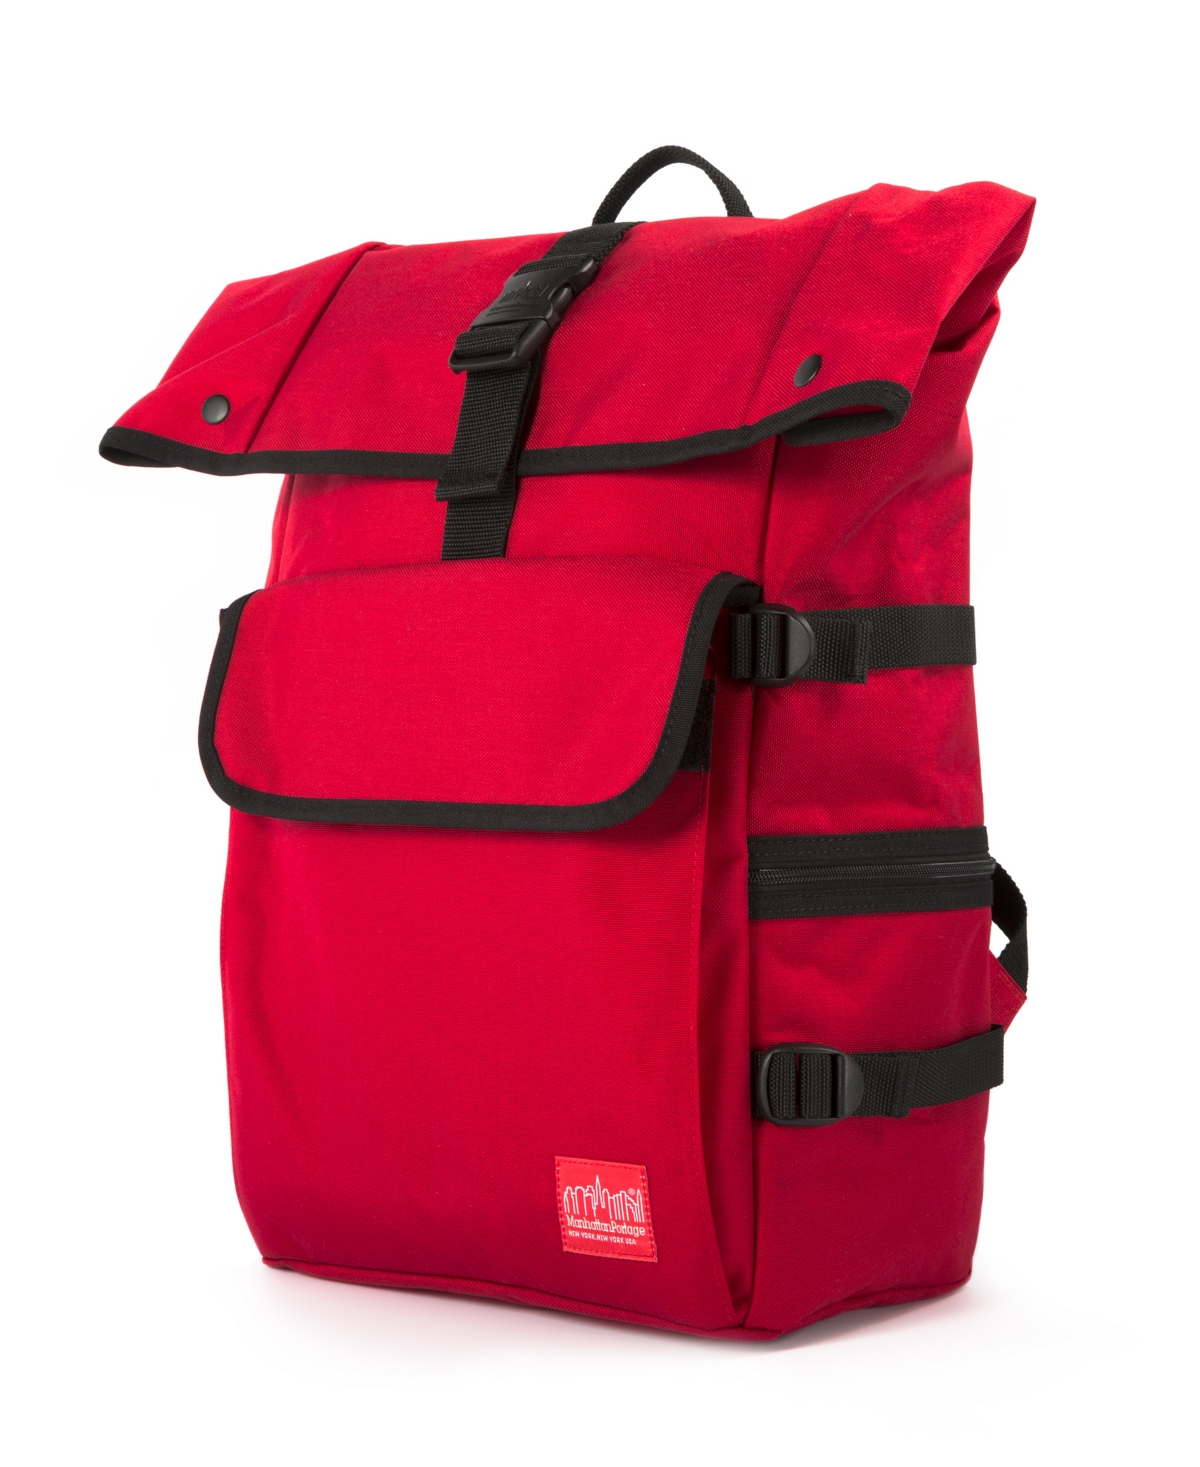 Silvercup Backpack - Red